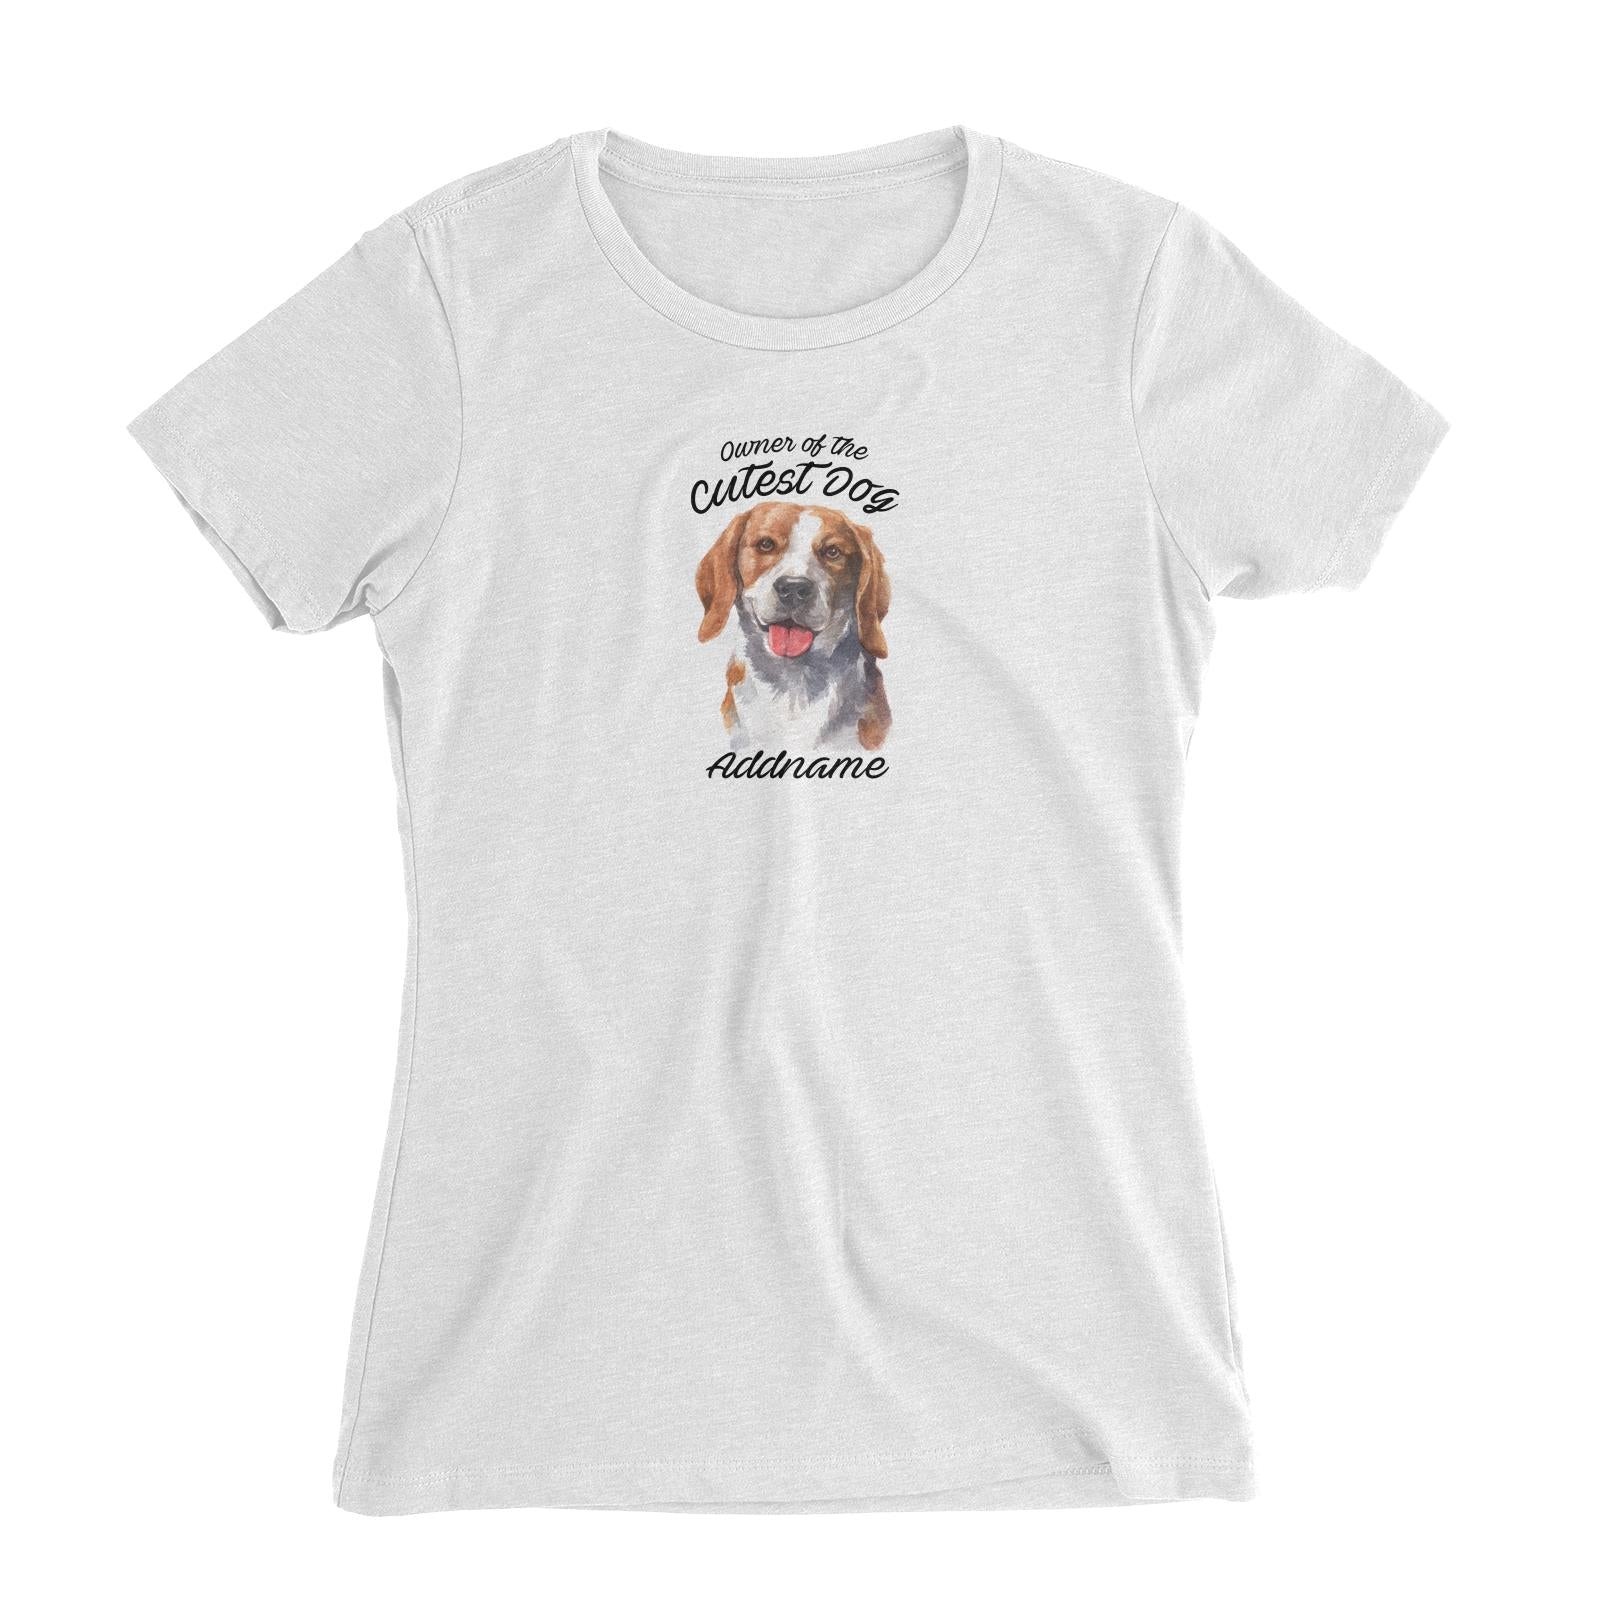 Watercolor Dog Owner Of The Cutest Dog Beagle Smile Addname Women's Slim Fit T-Shirt